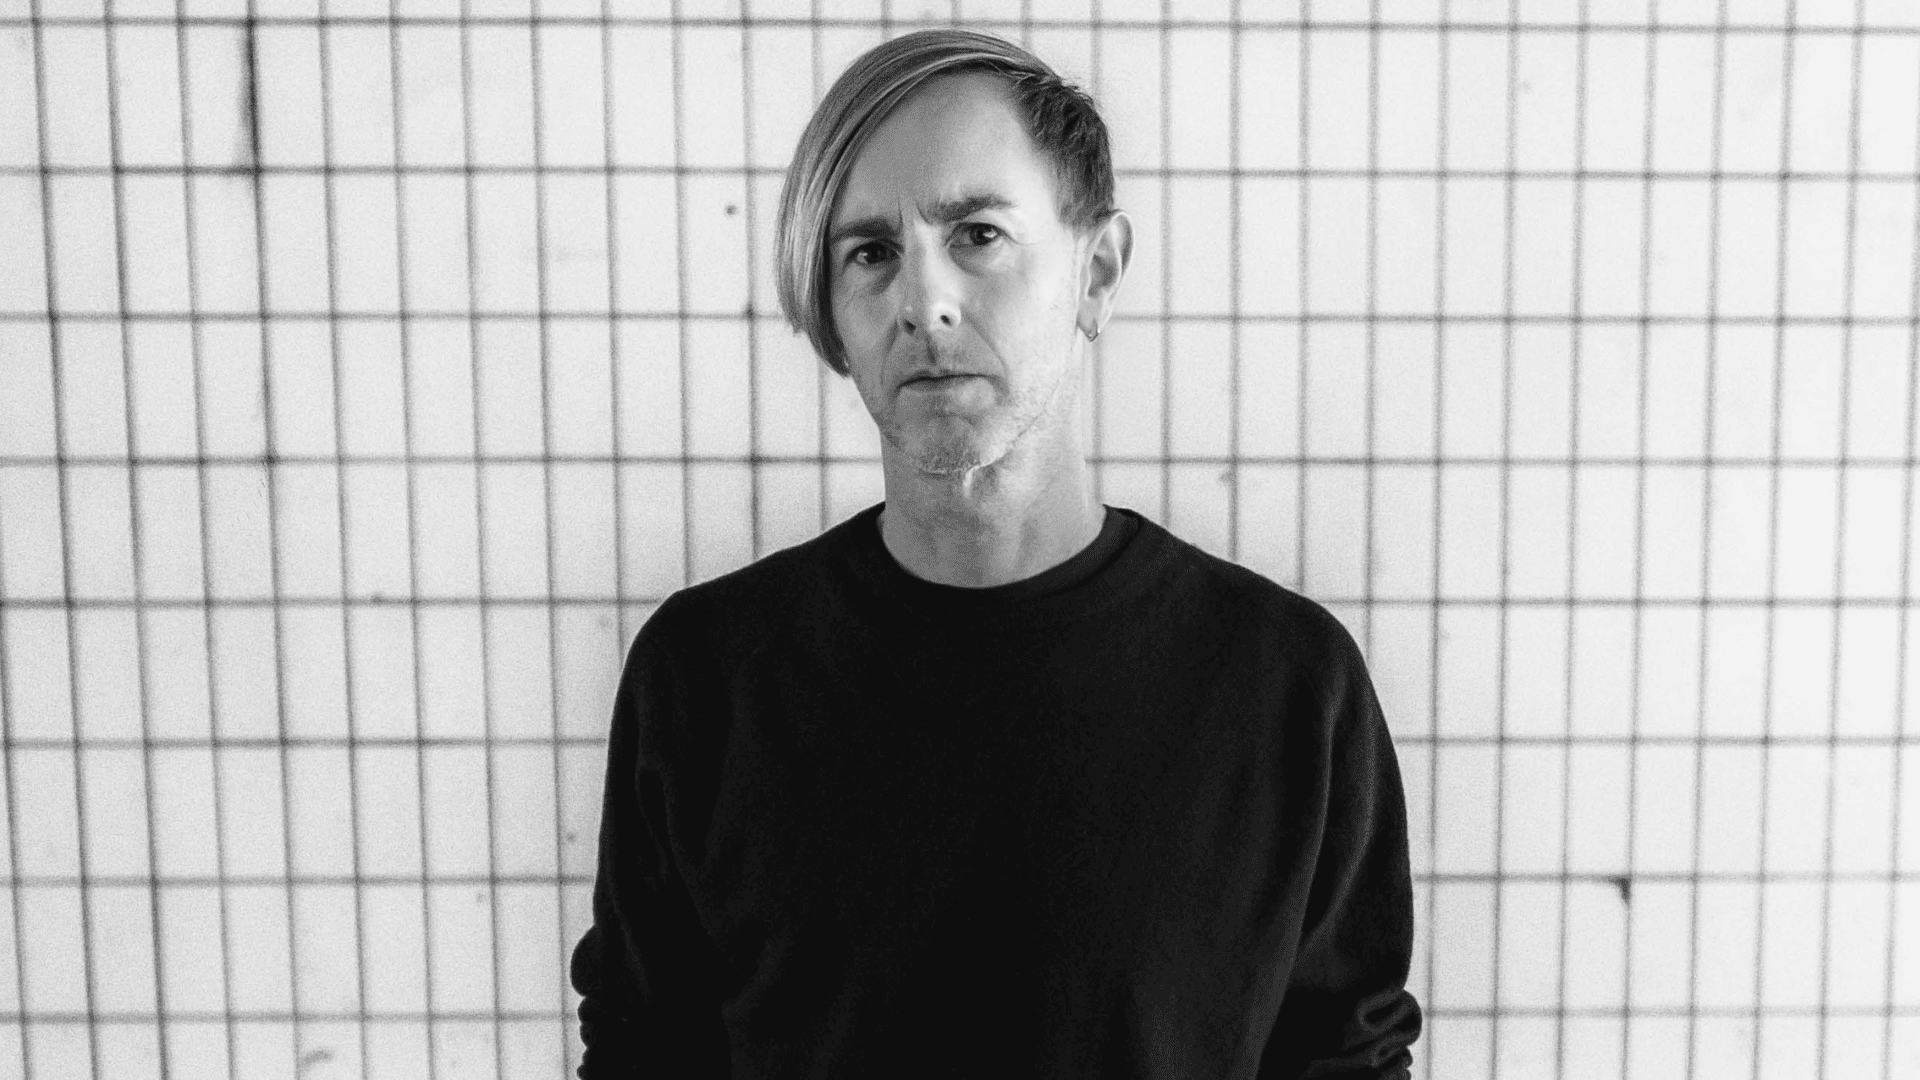 Richie Hawtin brings ‘From Our Minds’ to NYC for one night only